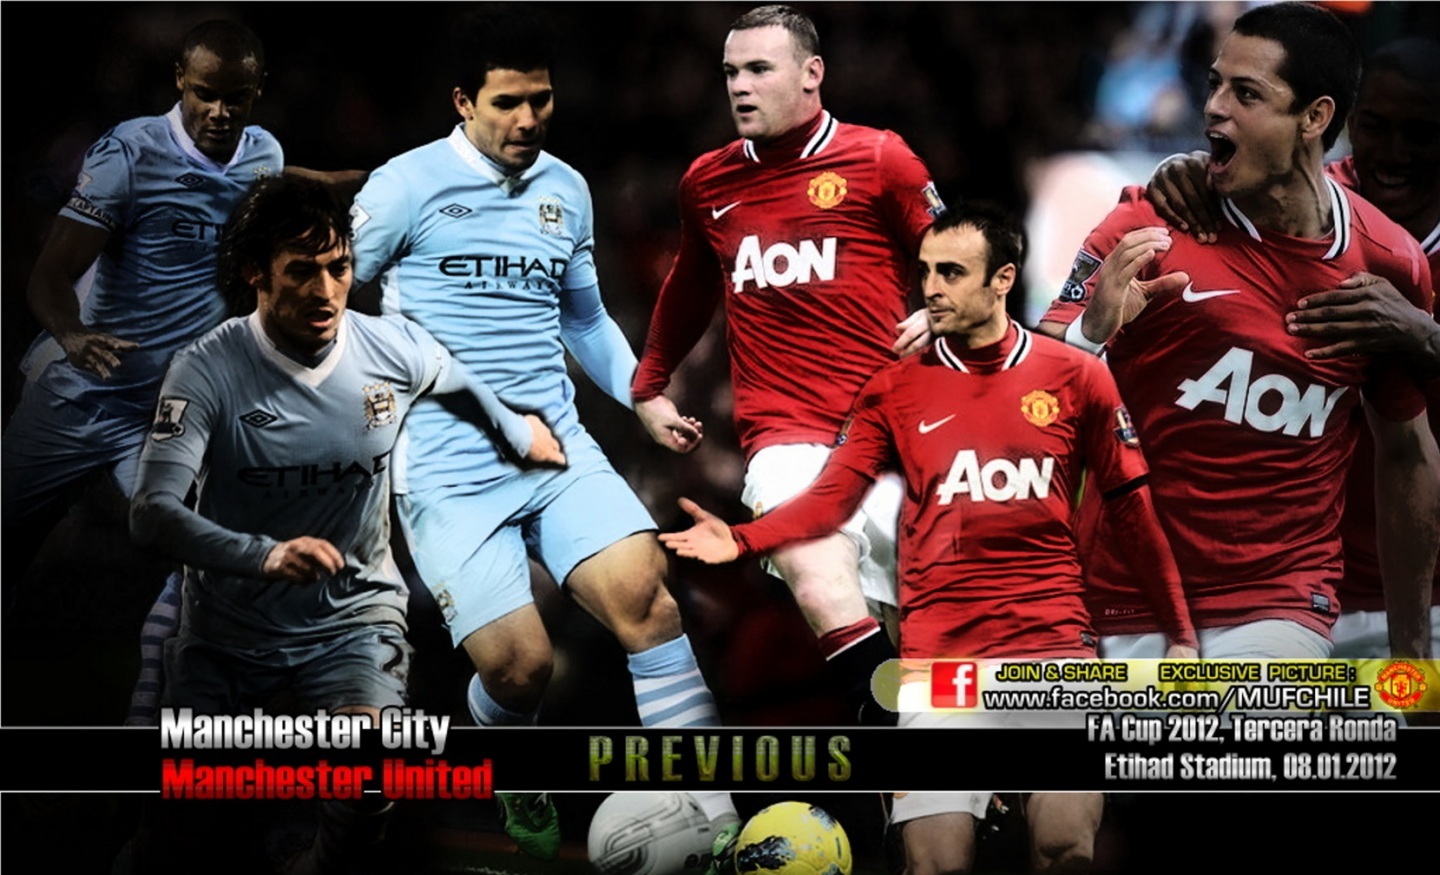 Manchester United Vs City Wallpaper Photo Shared By